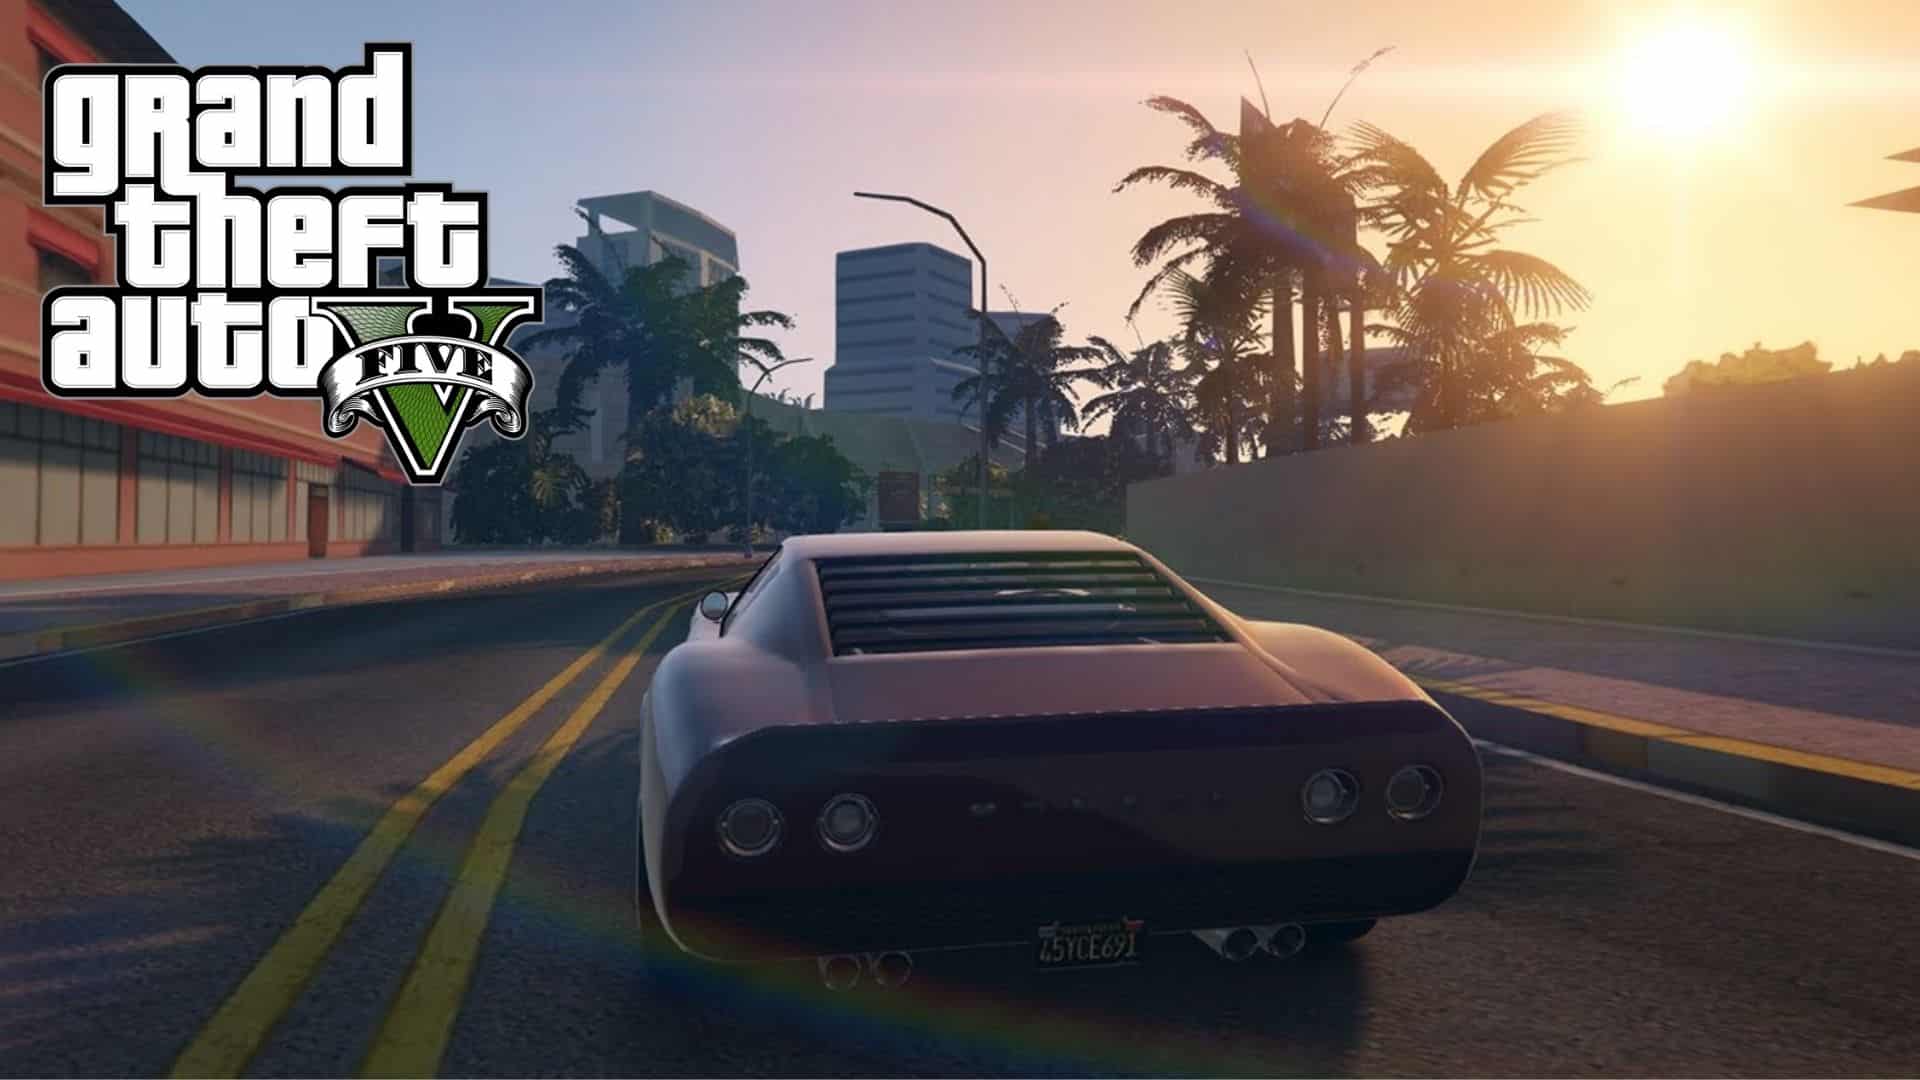 GTA Vice City mod in GTA 5 with new car